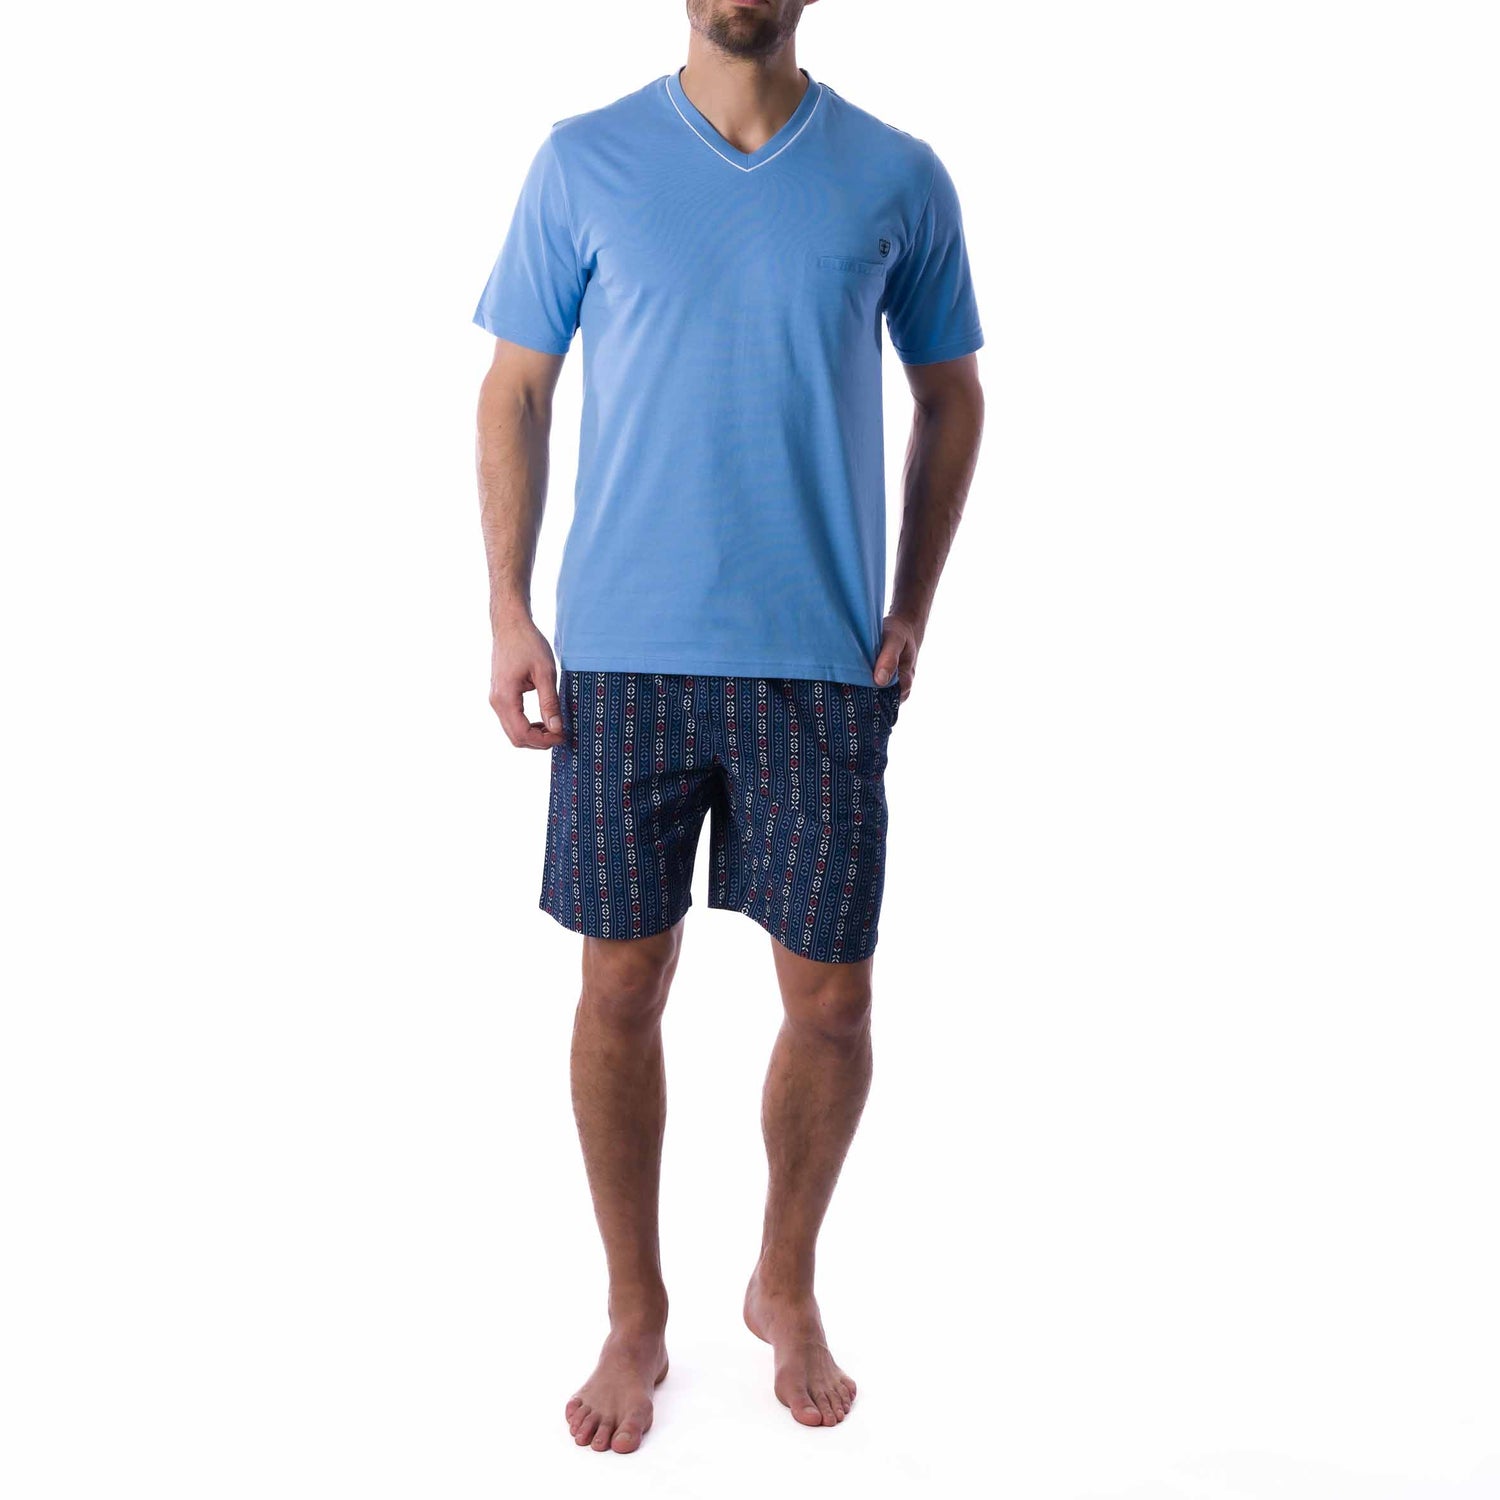 Short Pajamas in Blue and Navy Combed Cotton Jersey and Printed Poplin